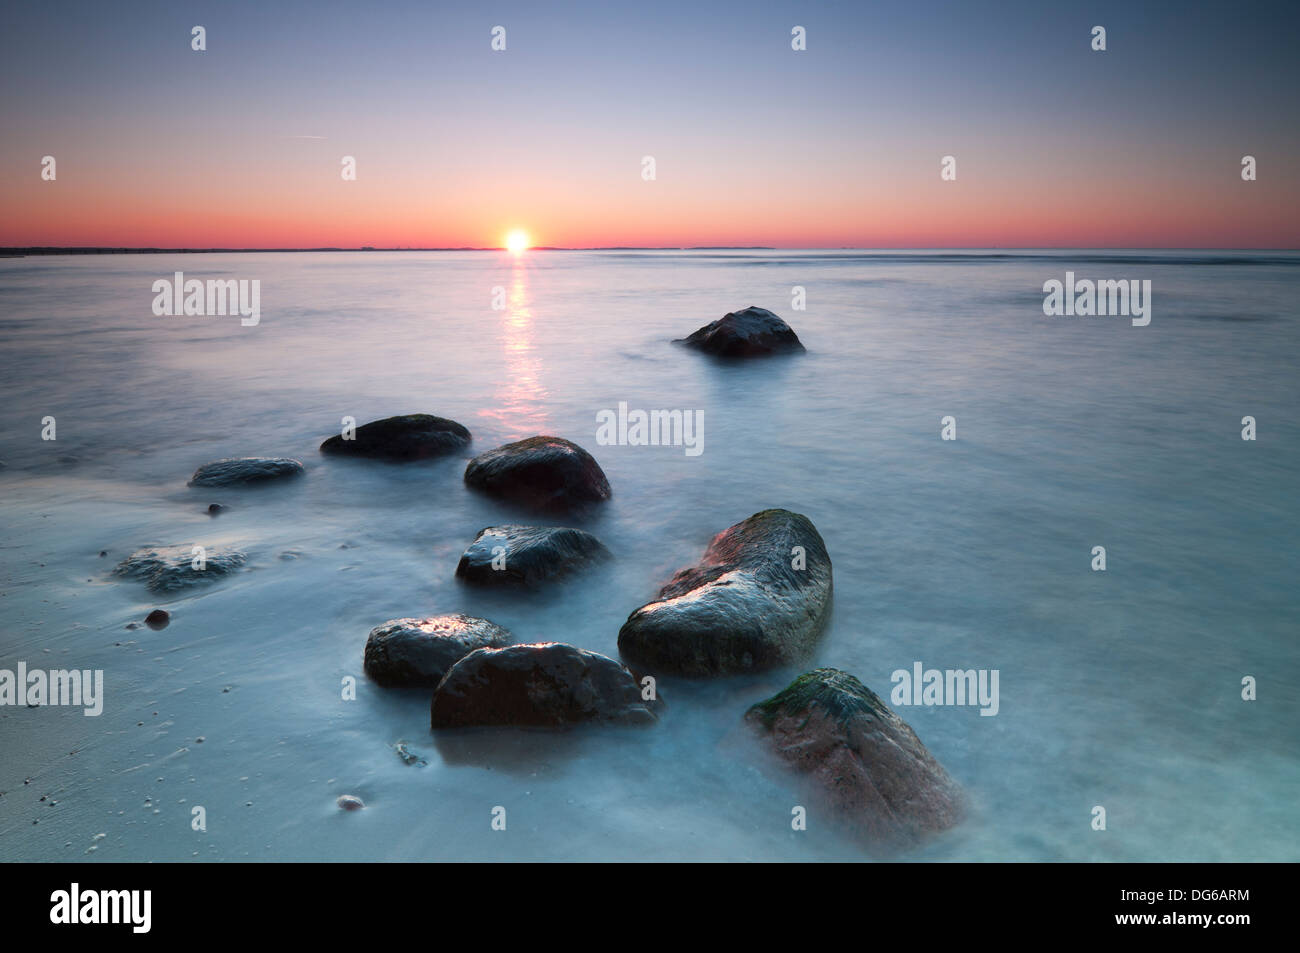 Sunset scenic view over Baltic Sea with stones in foreground. Long exposure. Stock Photo